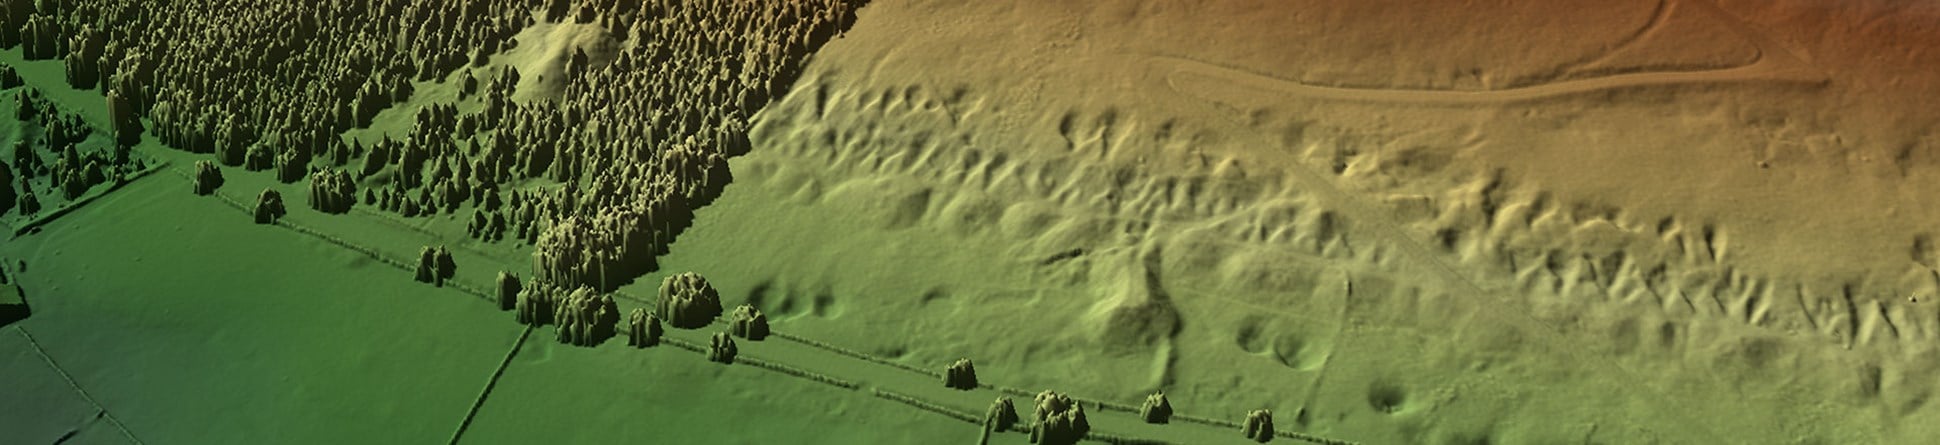 Colour image showing a stylised ground surface with trees to left and disturbed ground with mounds and pits to right